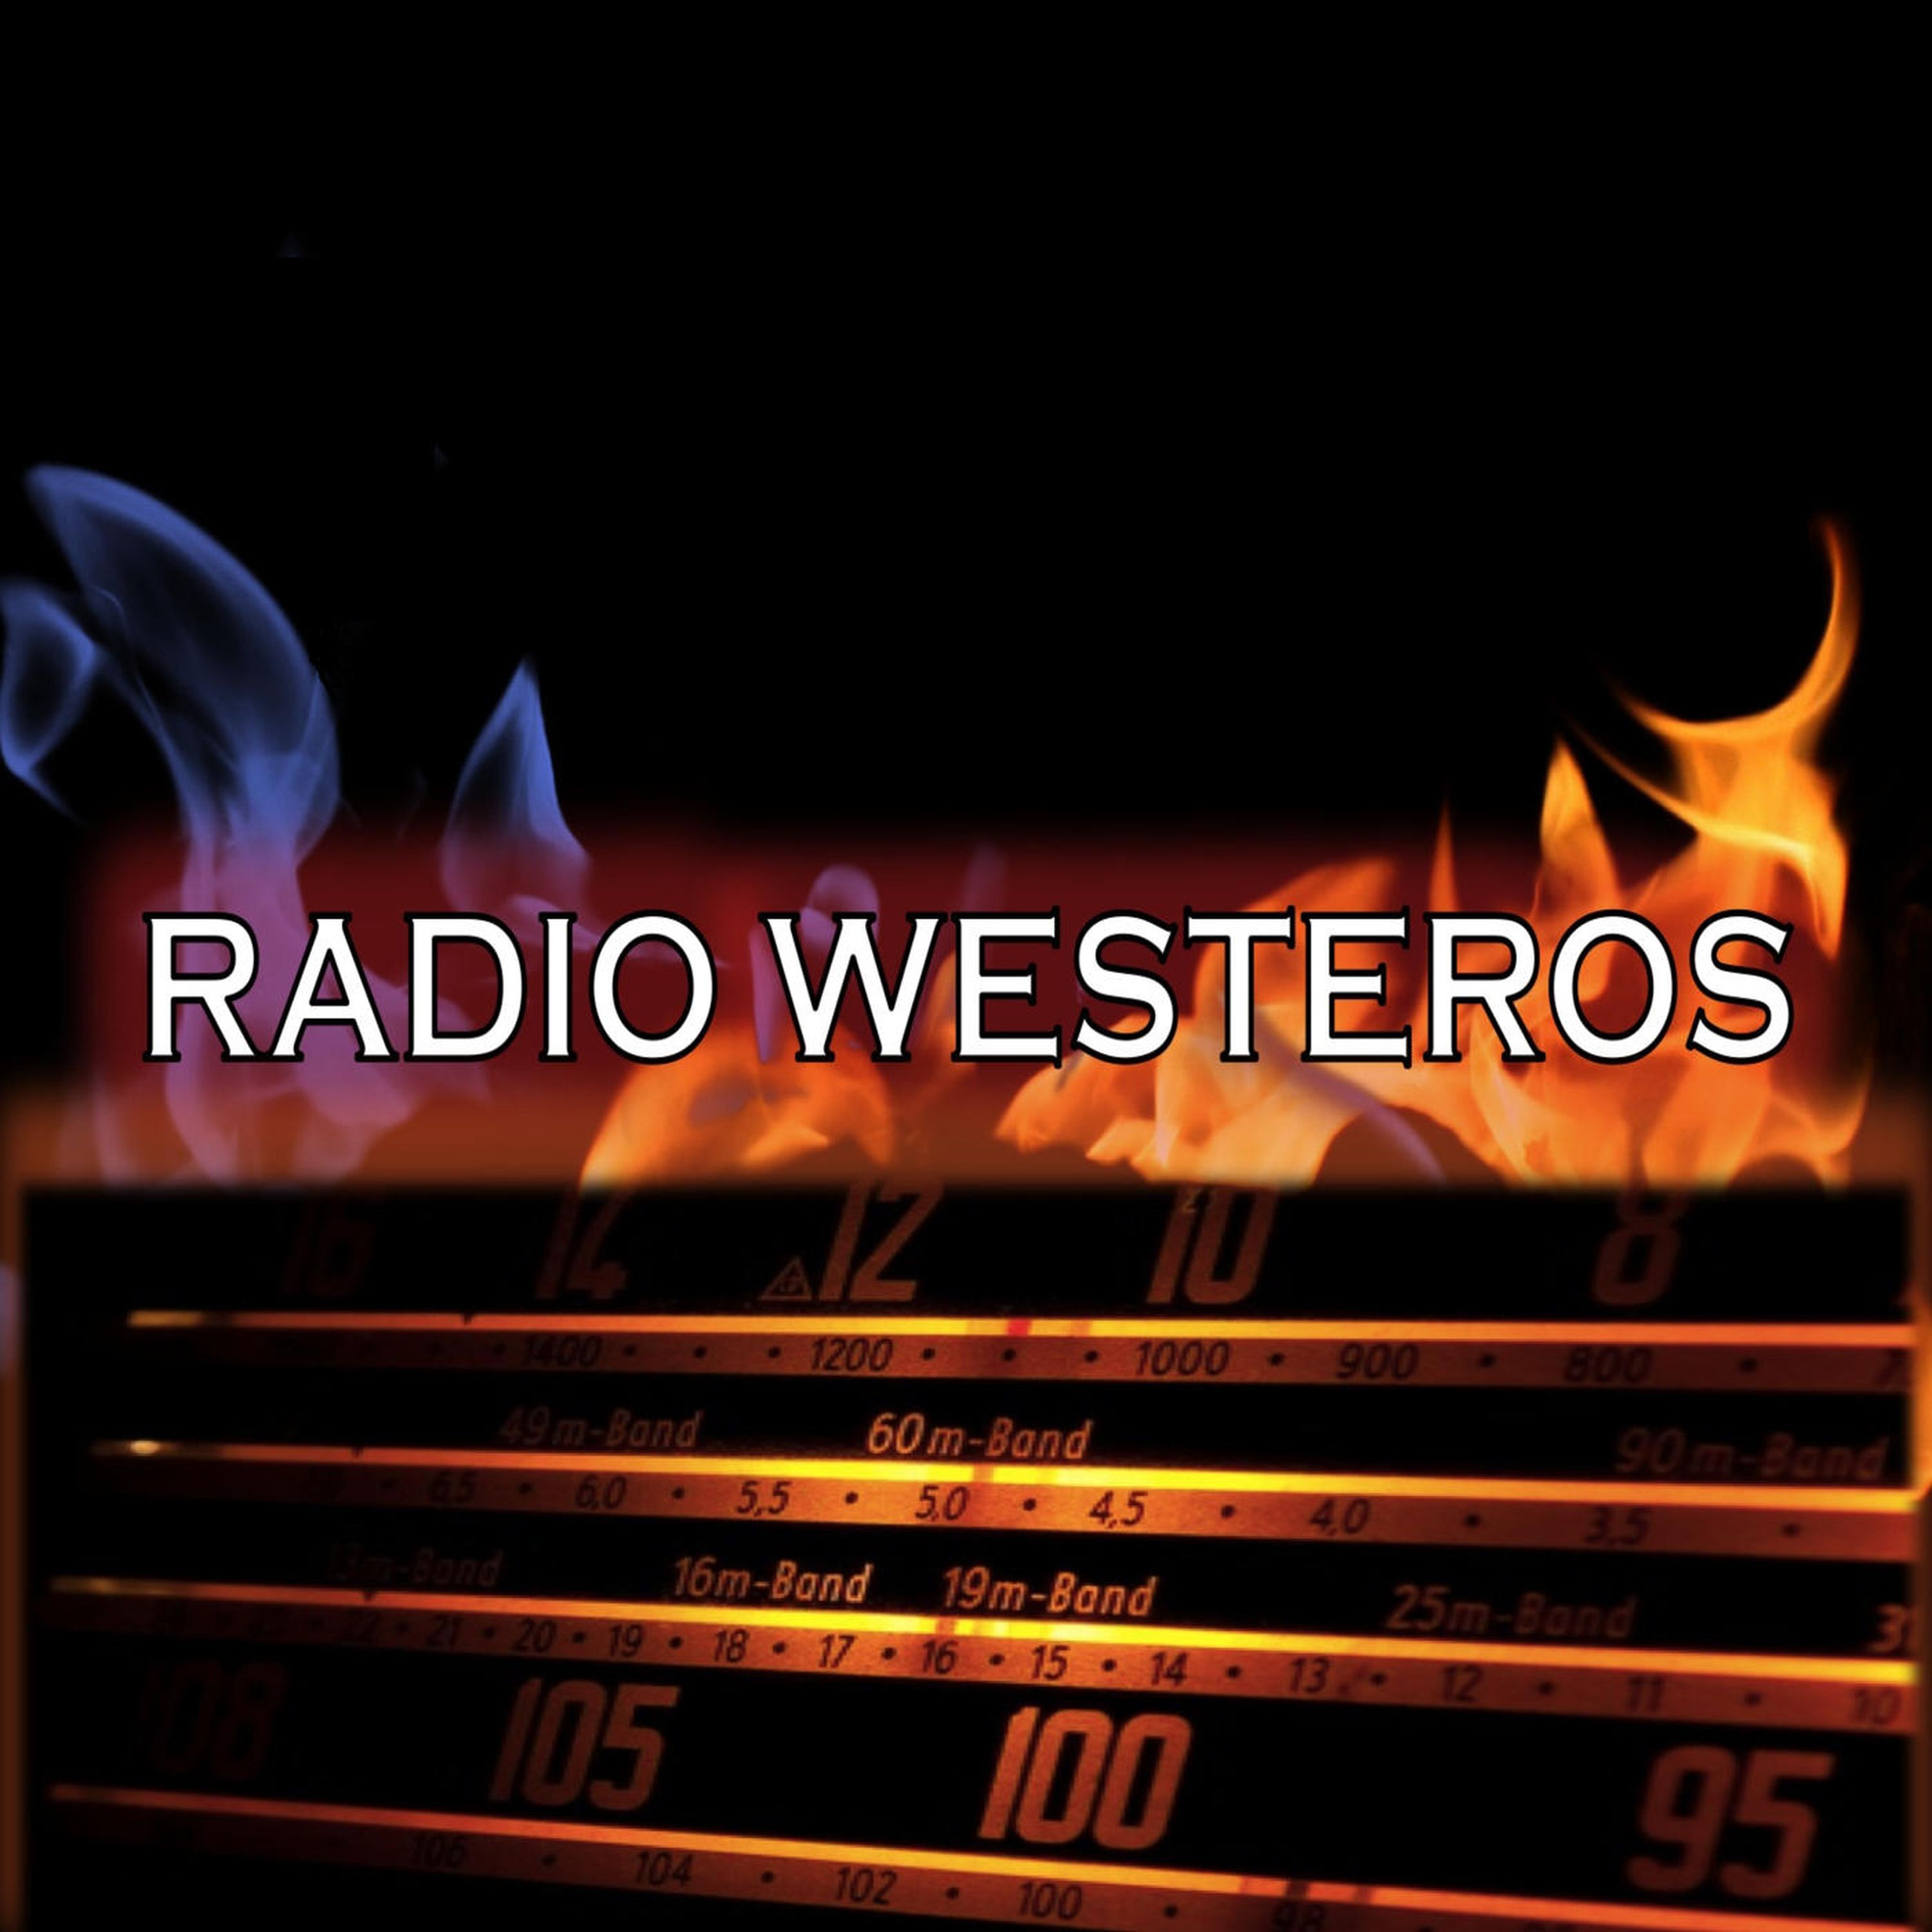 Radio Westeros E25 The Blackfyre Conspiracy - Writ in Blood